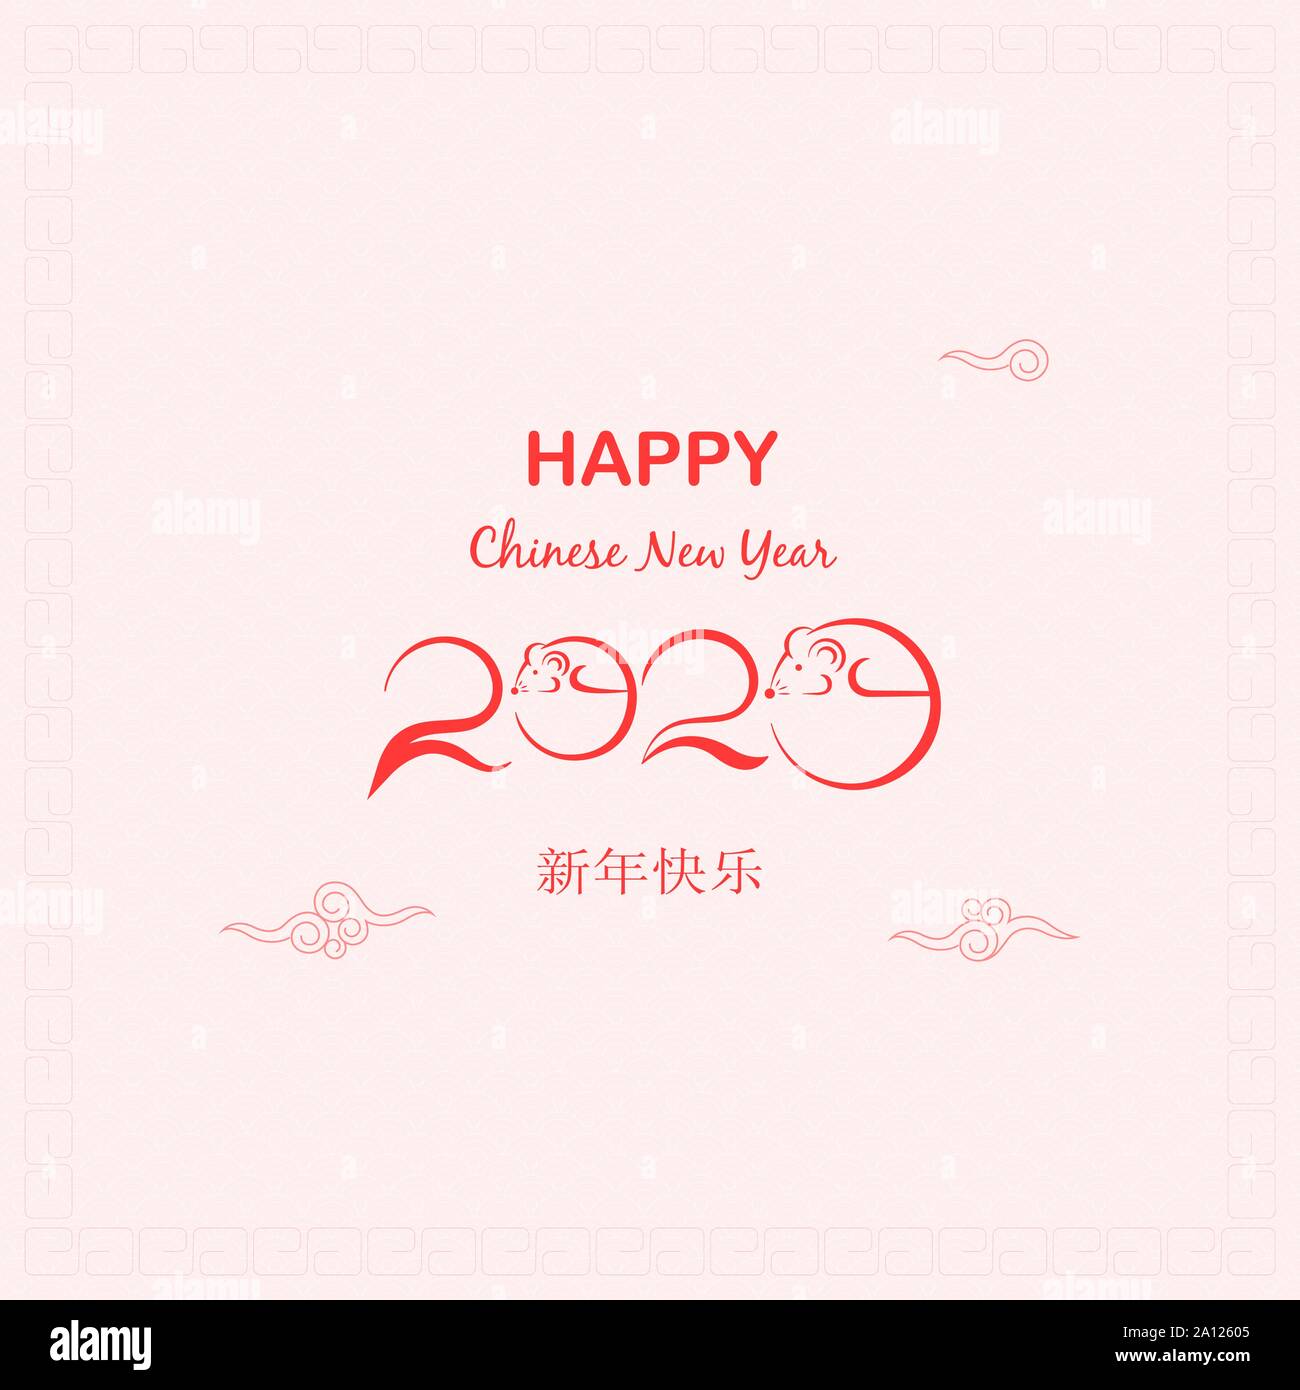 Chinese Zodiac greeting card design.Happy Chinese New Year 2020 background.Year of the ...1300 x 1390